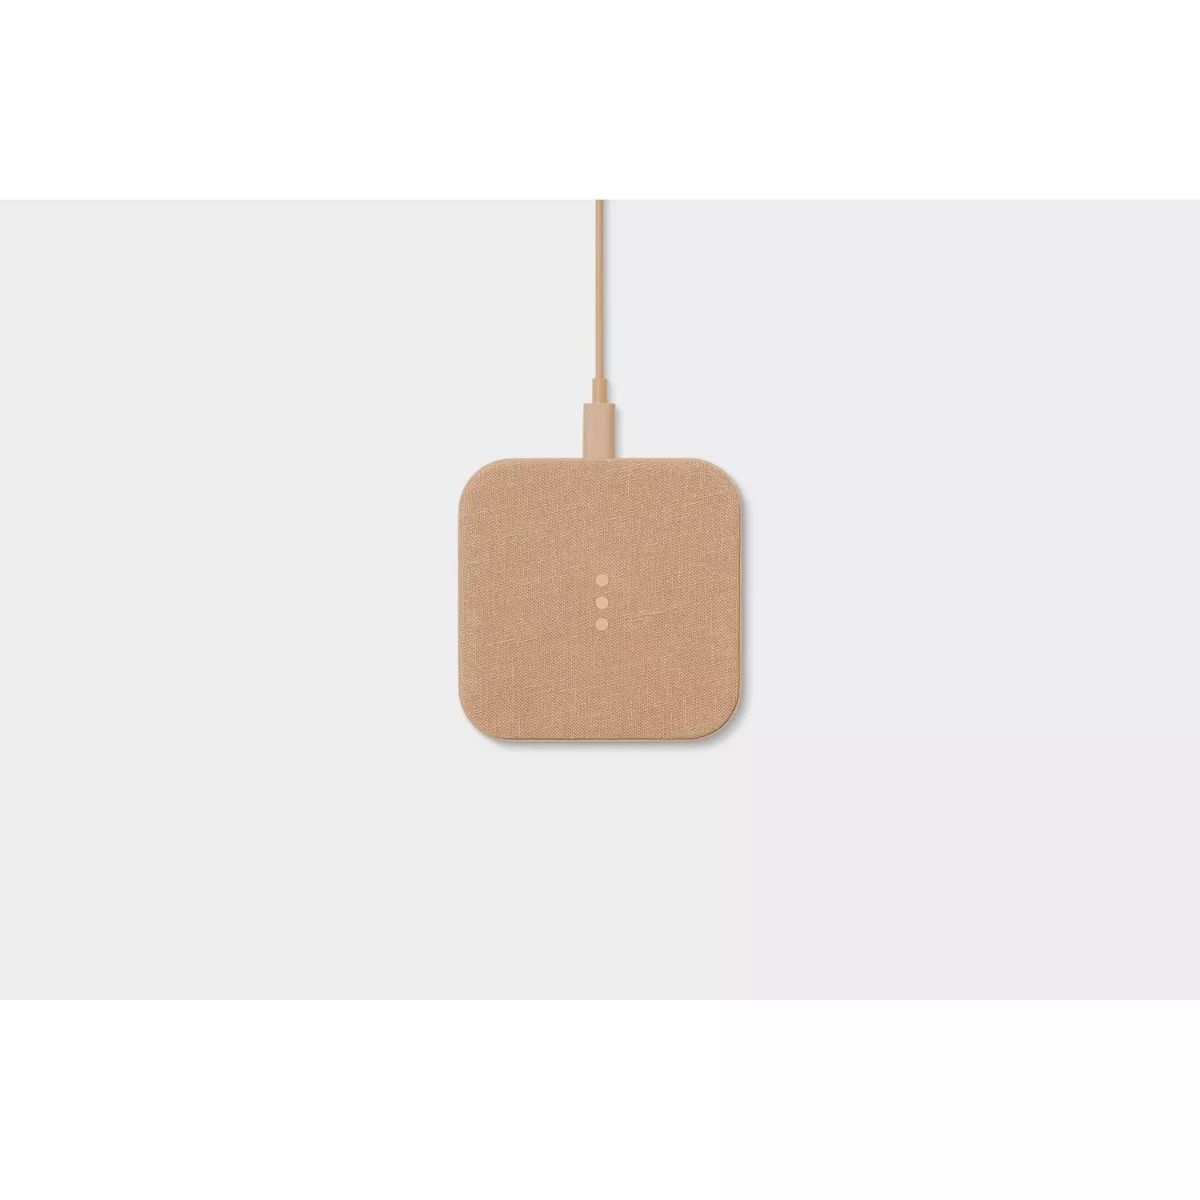 Courant Essentials CATCH:1 Single-Device Wireless Charger | Target